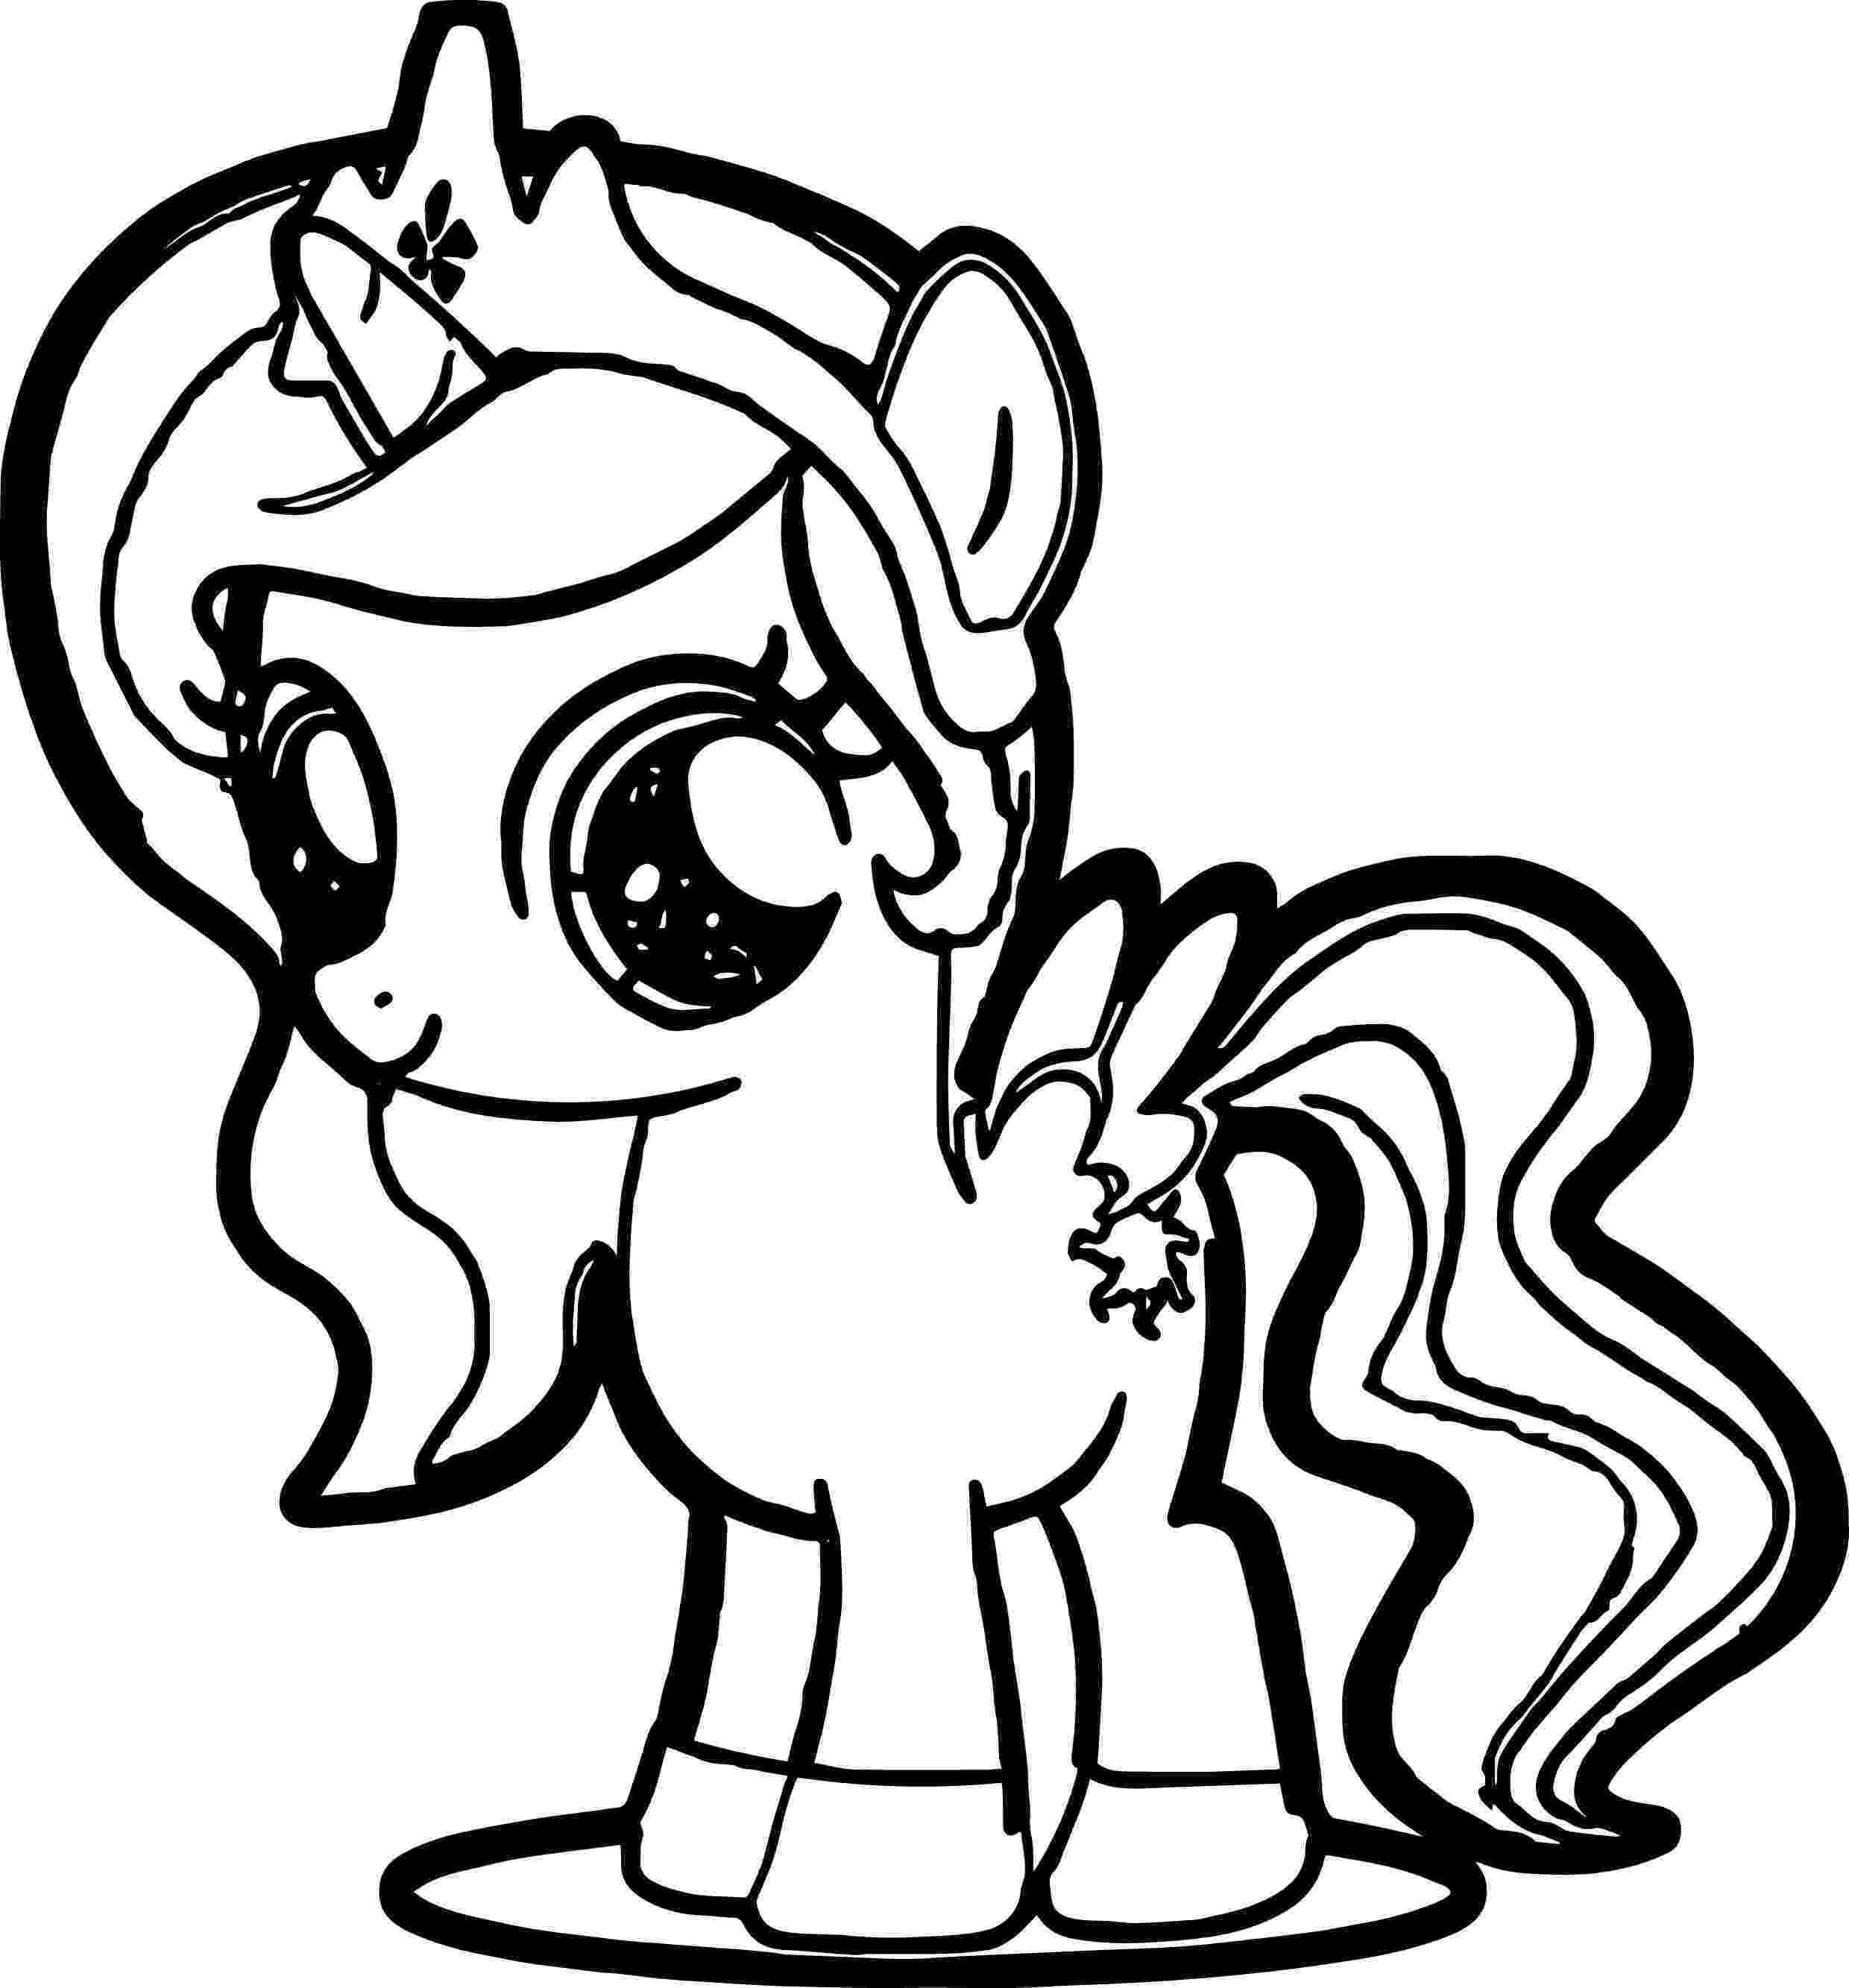 my little pony coloring pictures my little pony fluttershy 01 coloring page coloring little coloring my pictures pony 